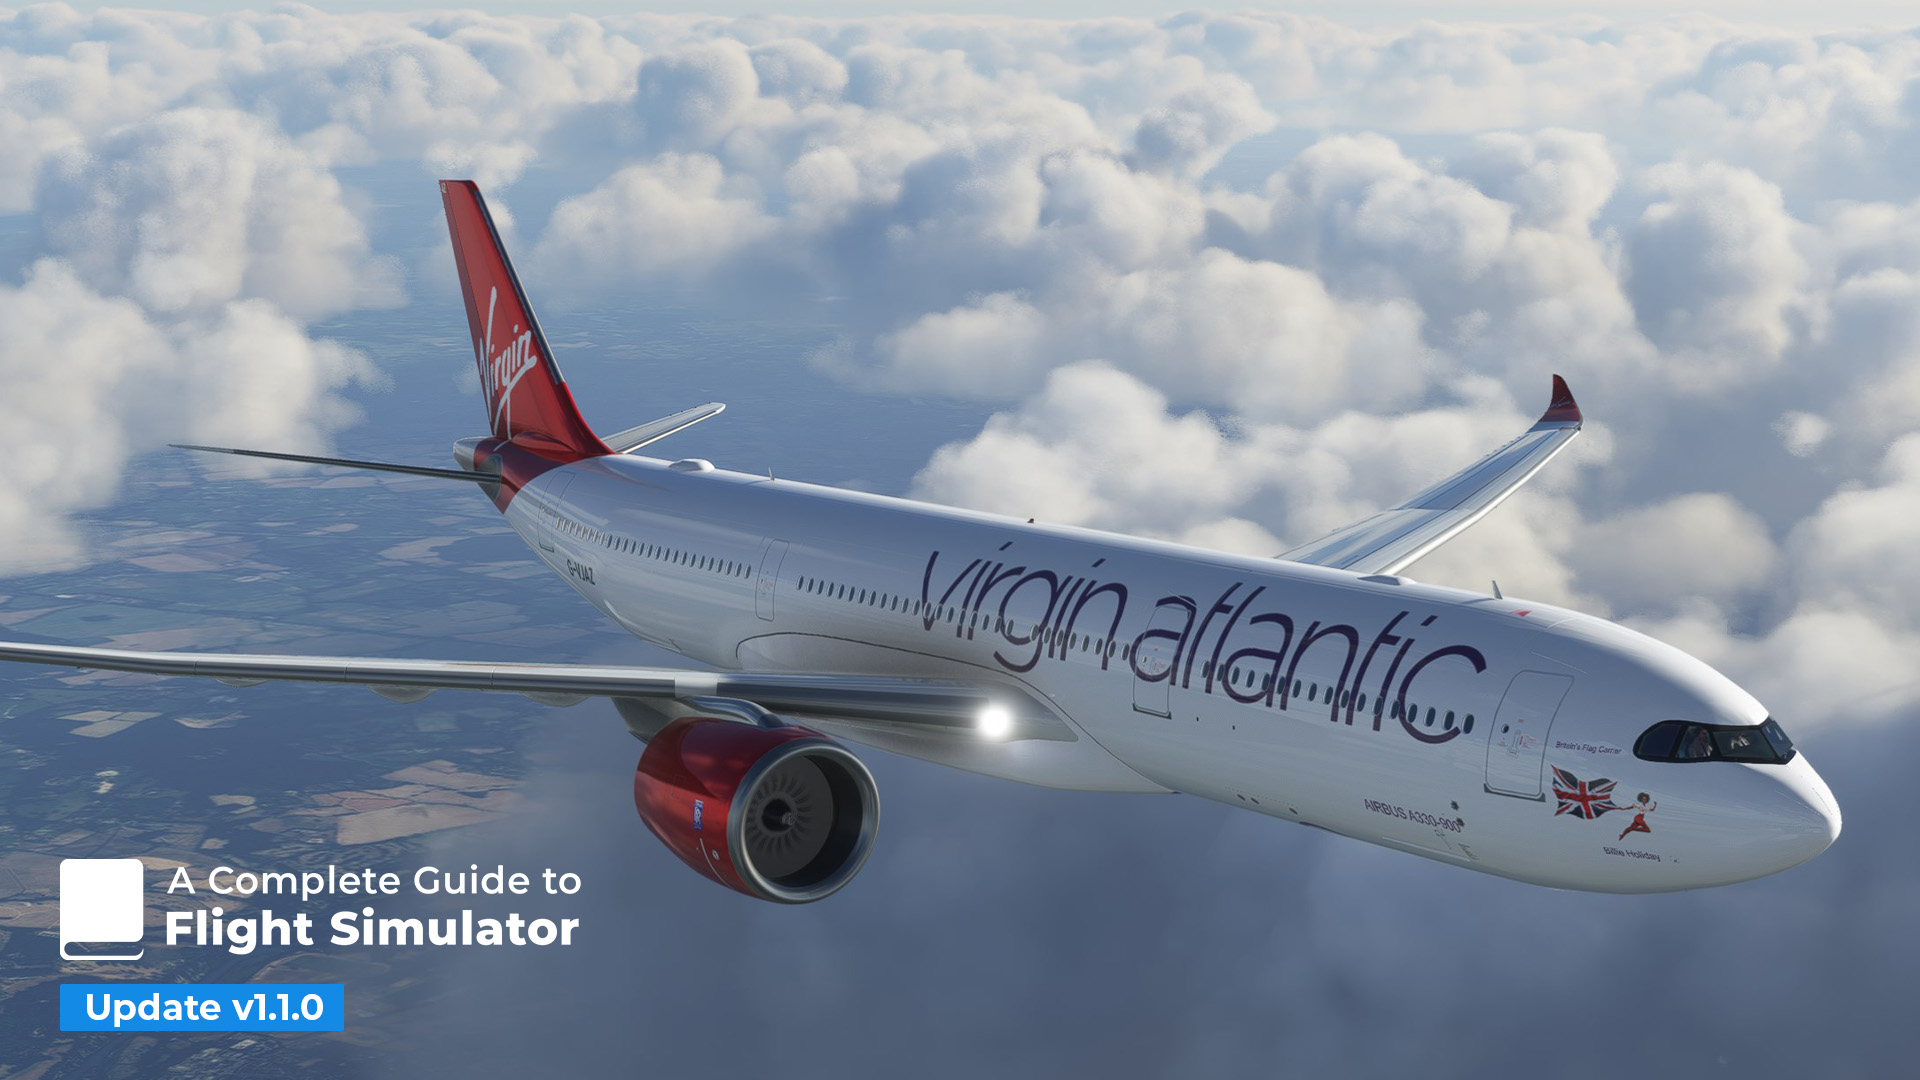 The Ultimate Guide to Buying a Home Flight Simulator PC [2023 Update]